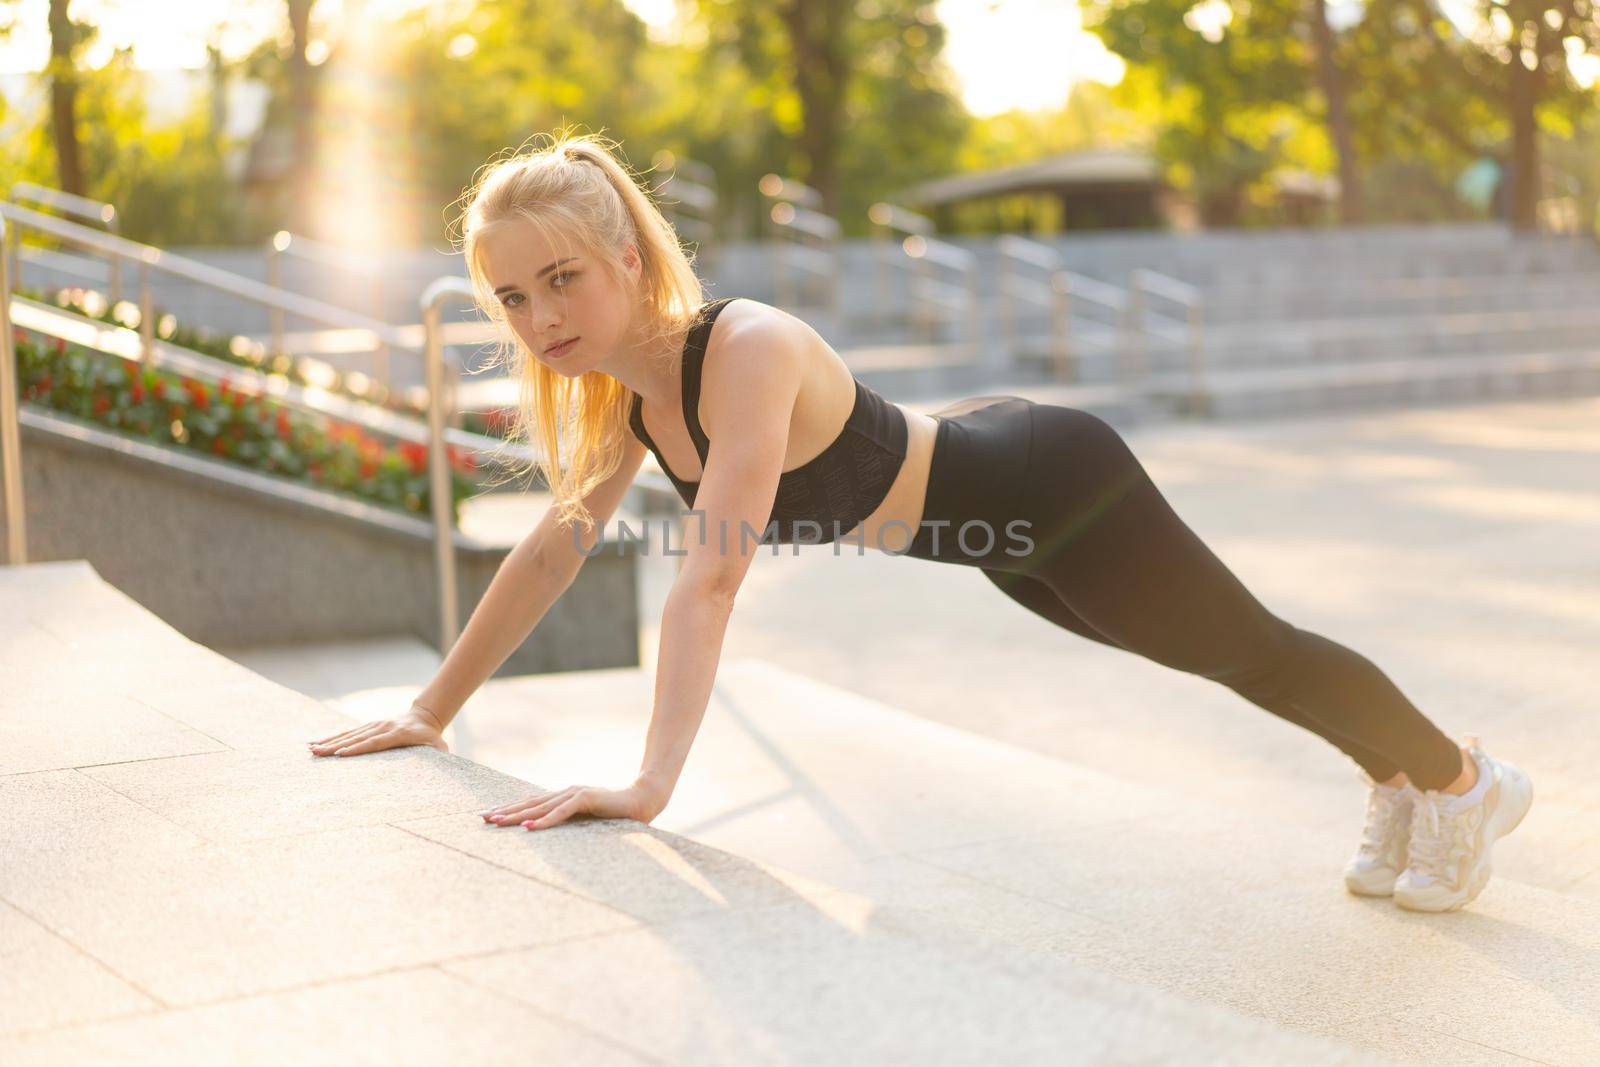 Sport and Fitness Fit Young Adult Woman Doing Plank Exercise Outdoor Urban Environment. Sunlight Summer Park Caucasian Ahlrtic Female Morning Workout Training Exercises Endurance Abs Muscle